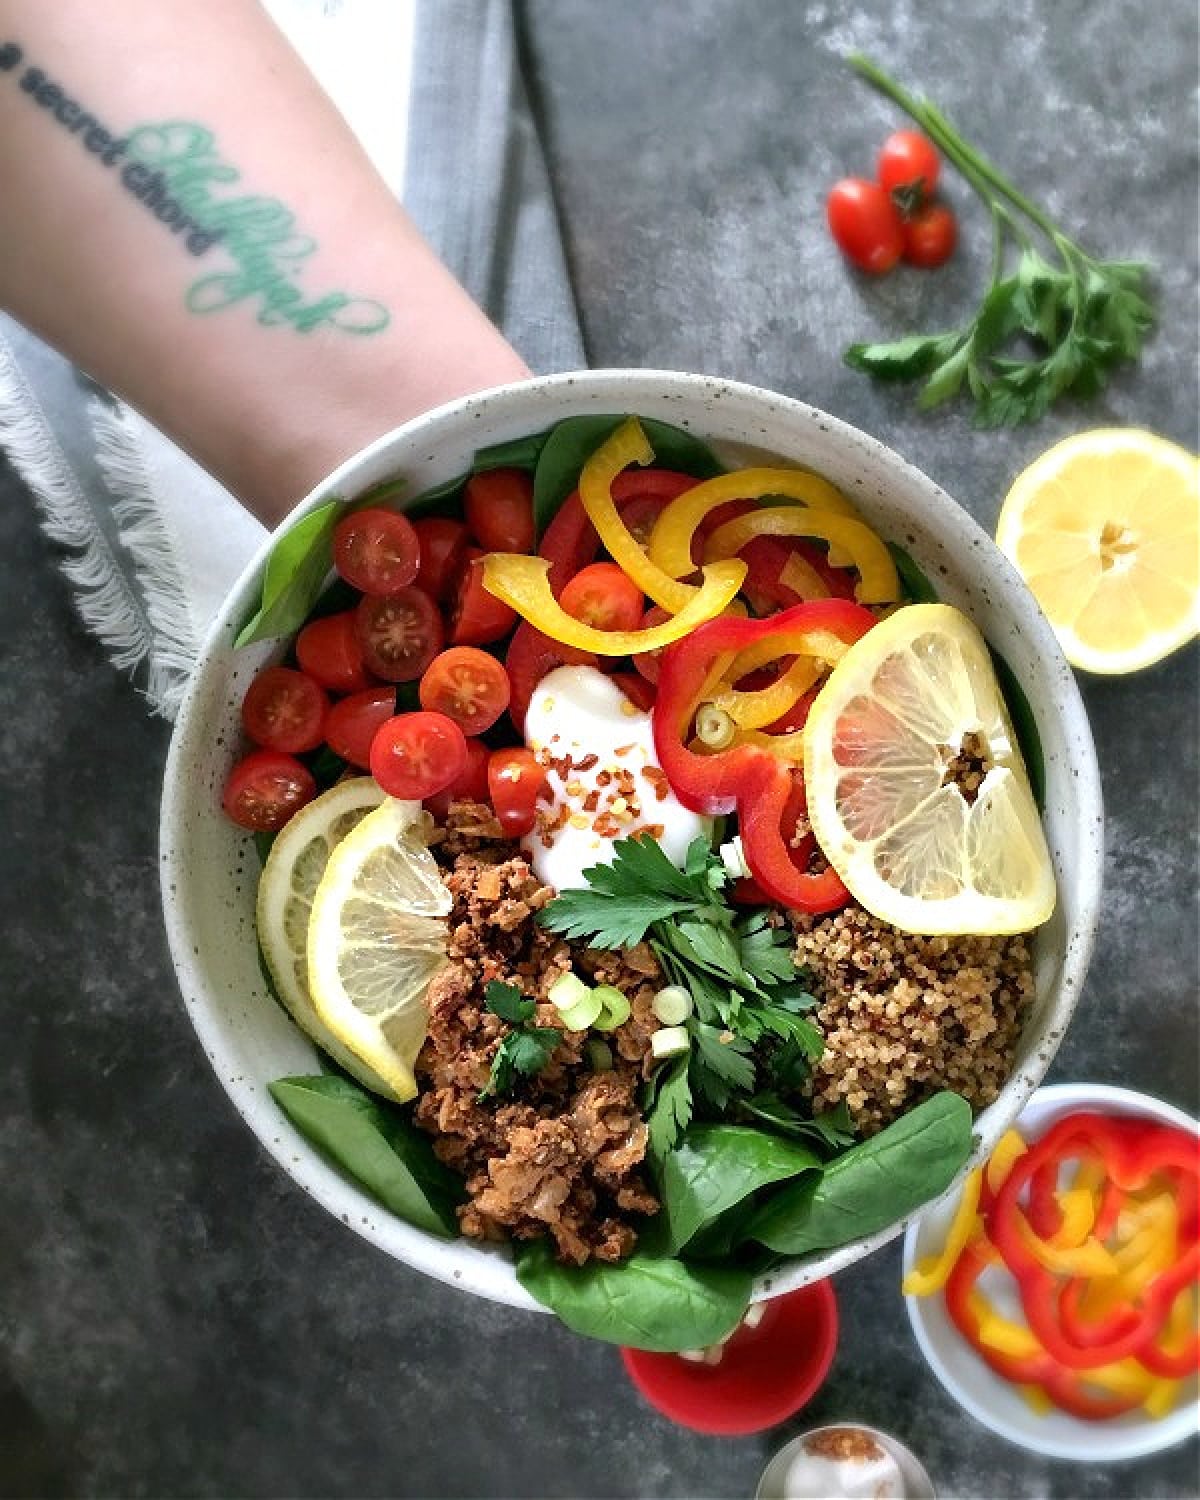 Overhead view of a tattooed arm and hand holding a deconstructed stuffed pepper bowl (spinach and greens, vegan ground beef, cherry tomatoes, bell pepper slices, green onion and cilantro).